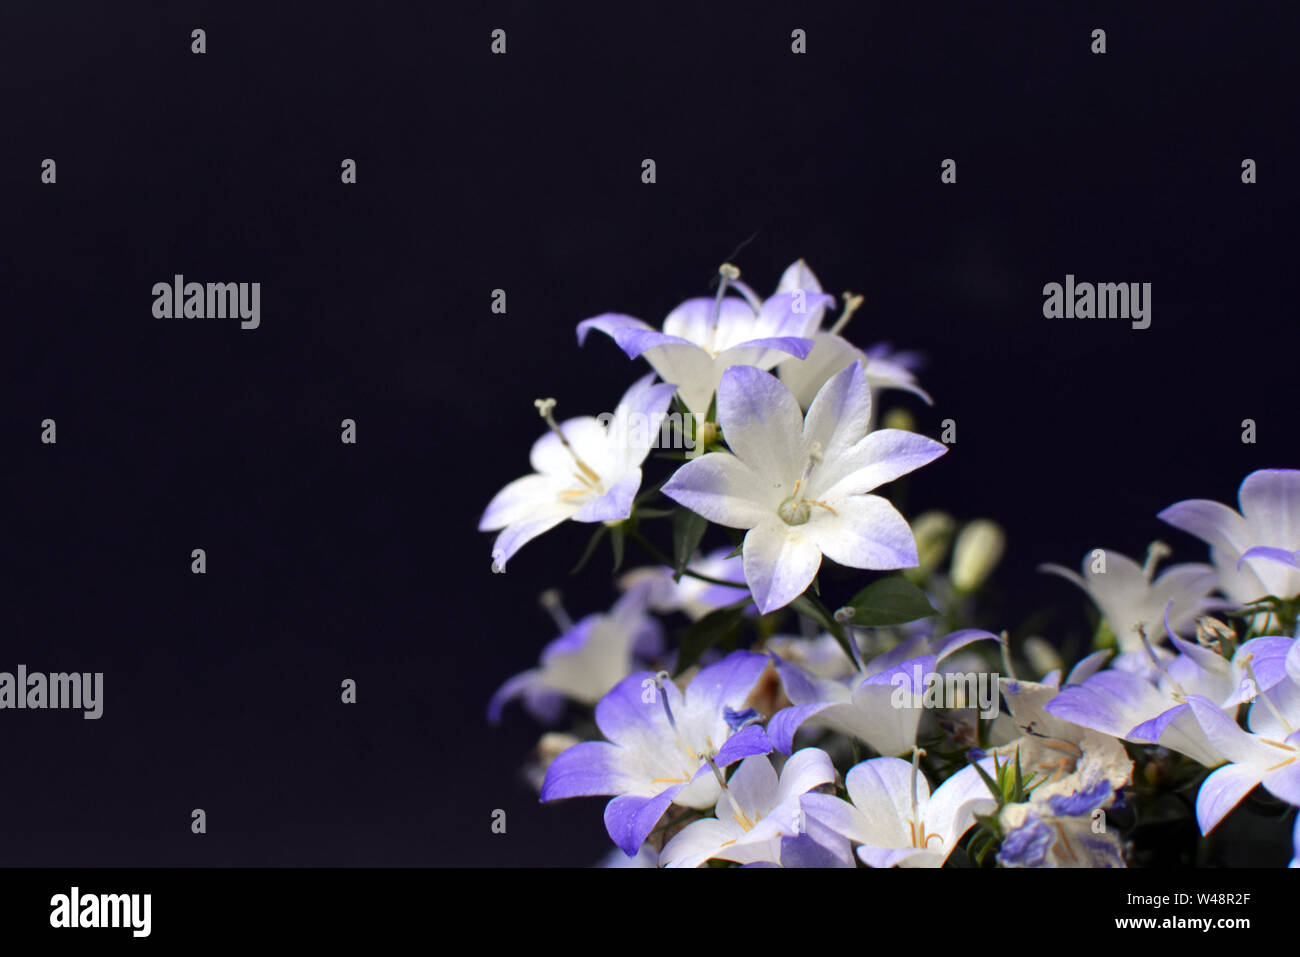 Violet and white blooming 'Campanula' Bell Flower ' on dark black background Stock Photo